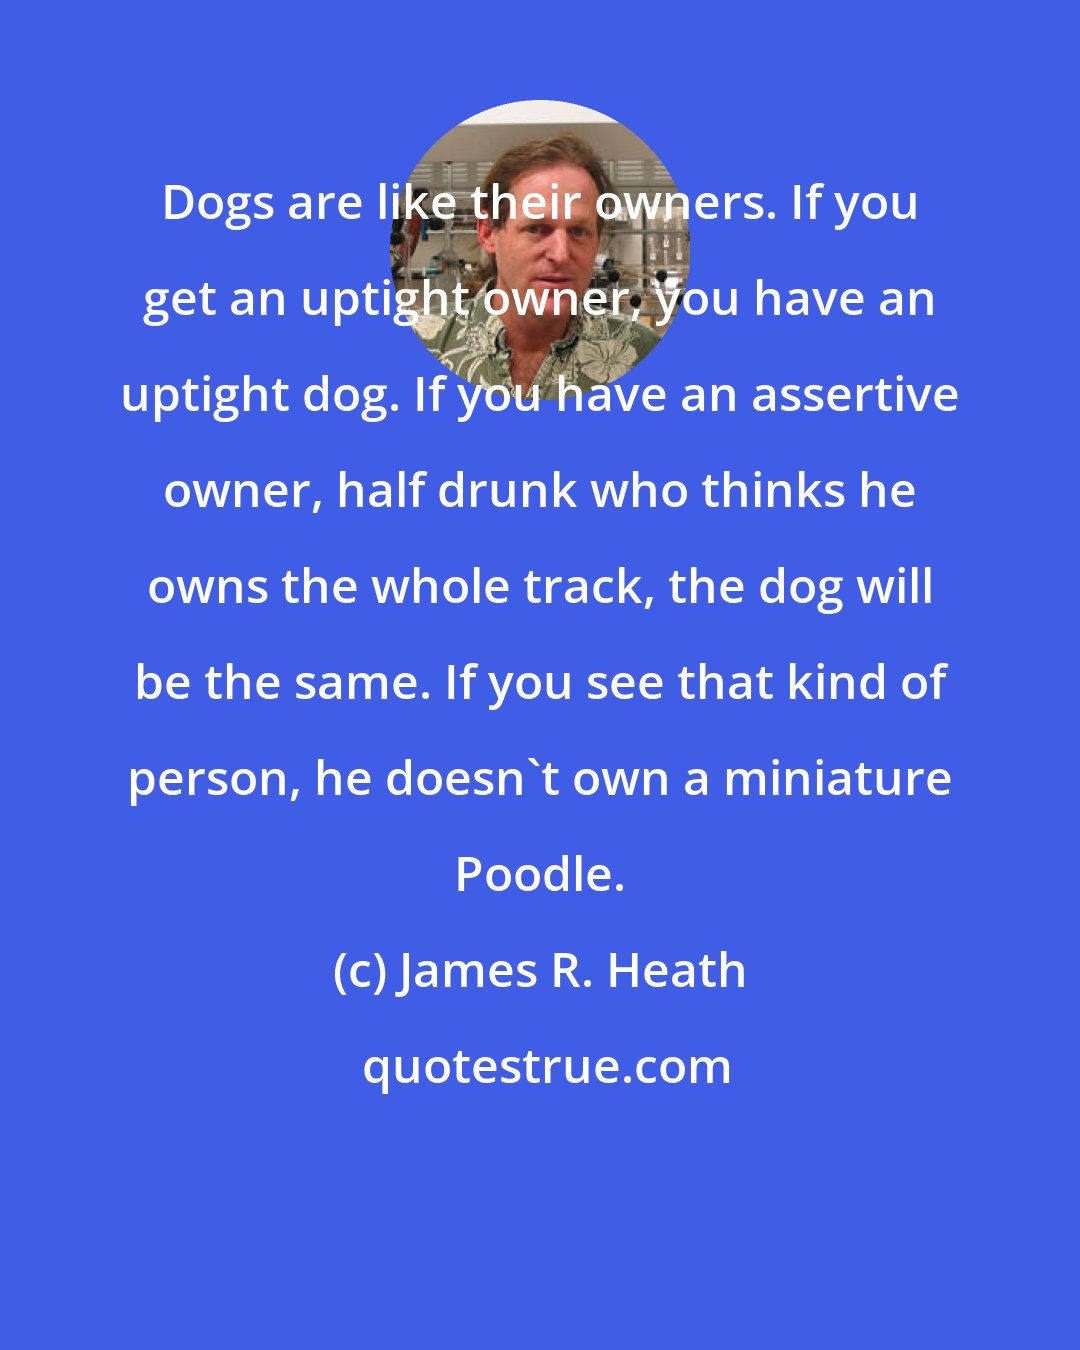 James R. Heath: Dogs are like their owners. If you get an uptight owner, you have an uptight dog. If you have an assertive owner, half drunk who thinks he owns the whole track, the dog will be the same. If you see that kind of person, he doesn't own a miniature Poodle.